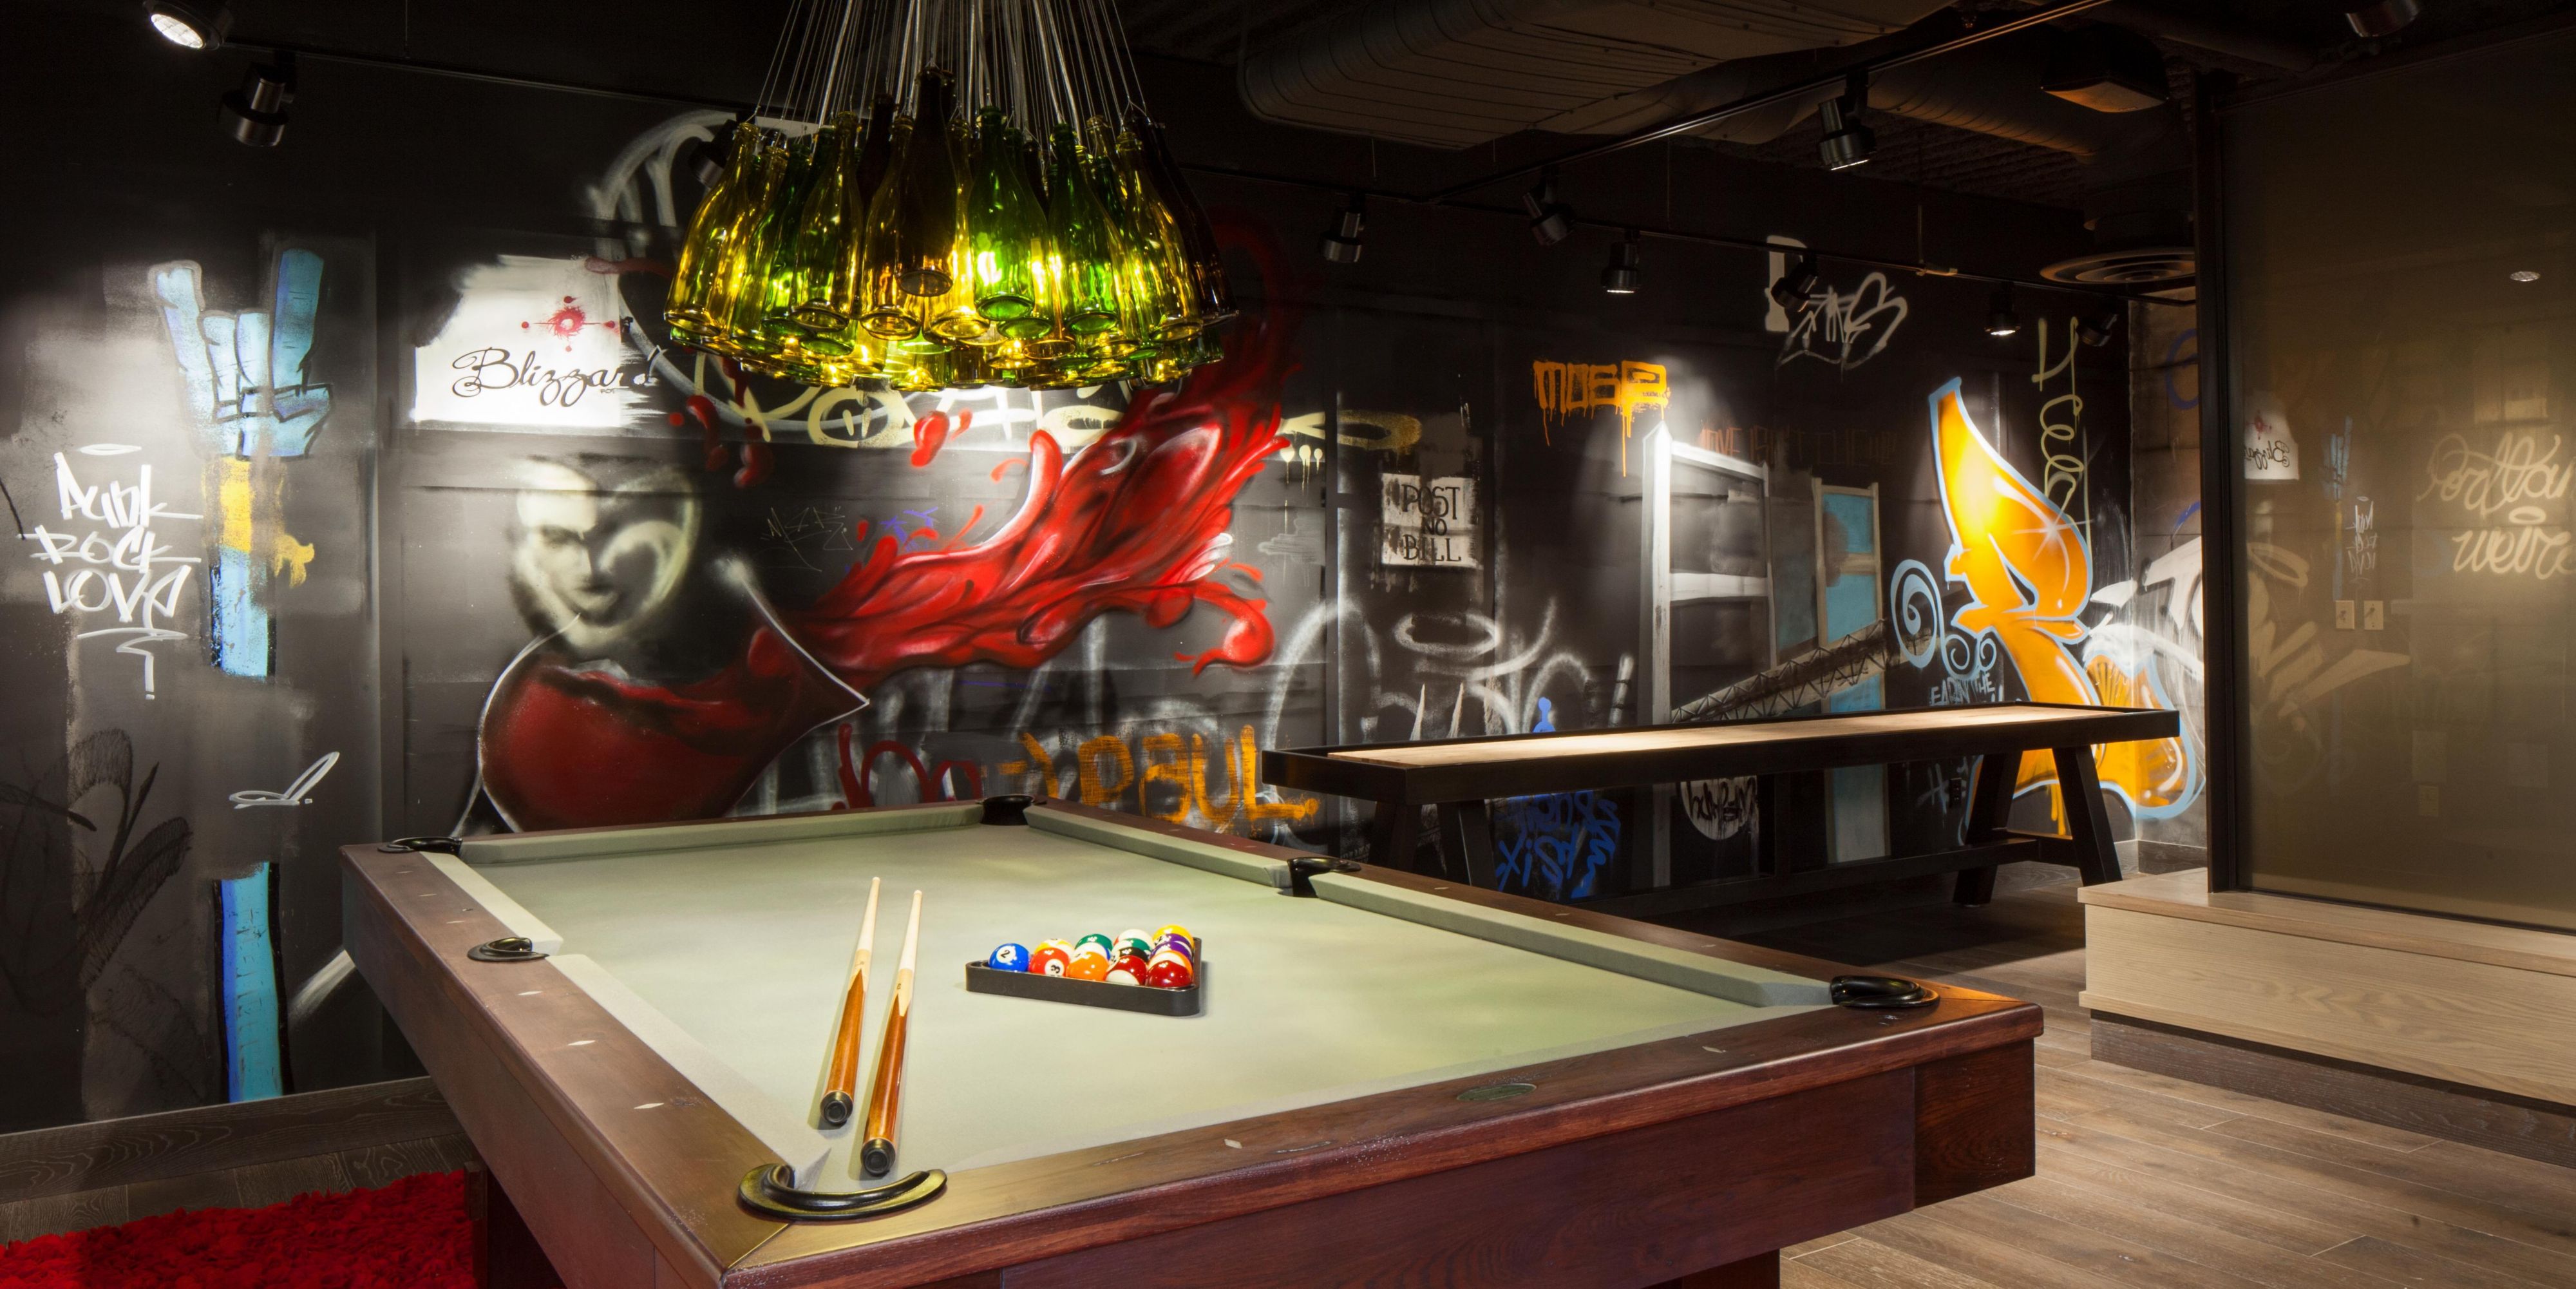 Featuring an array of games from classic to cool, guests can rack up a game of pool, try their luck at our two story wall mounted Plinko or go old school with our selection of classic arcade style video games.